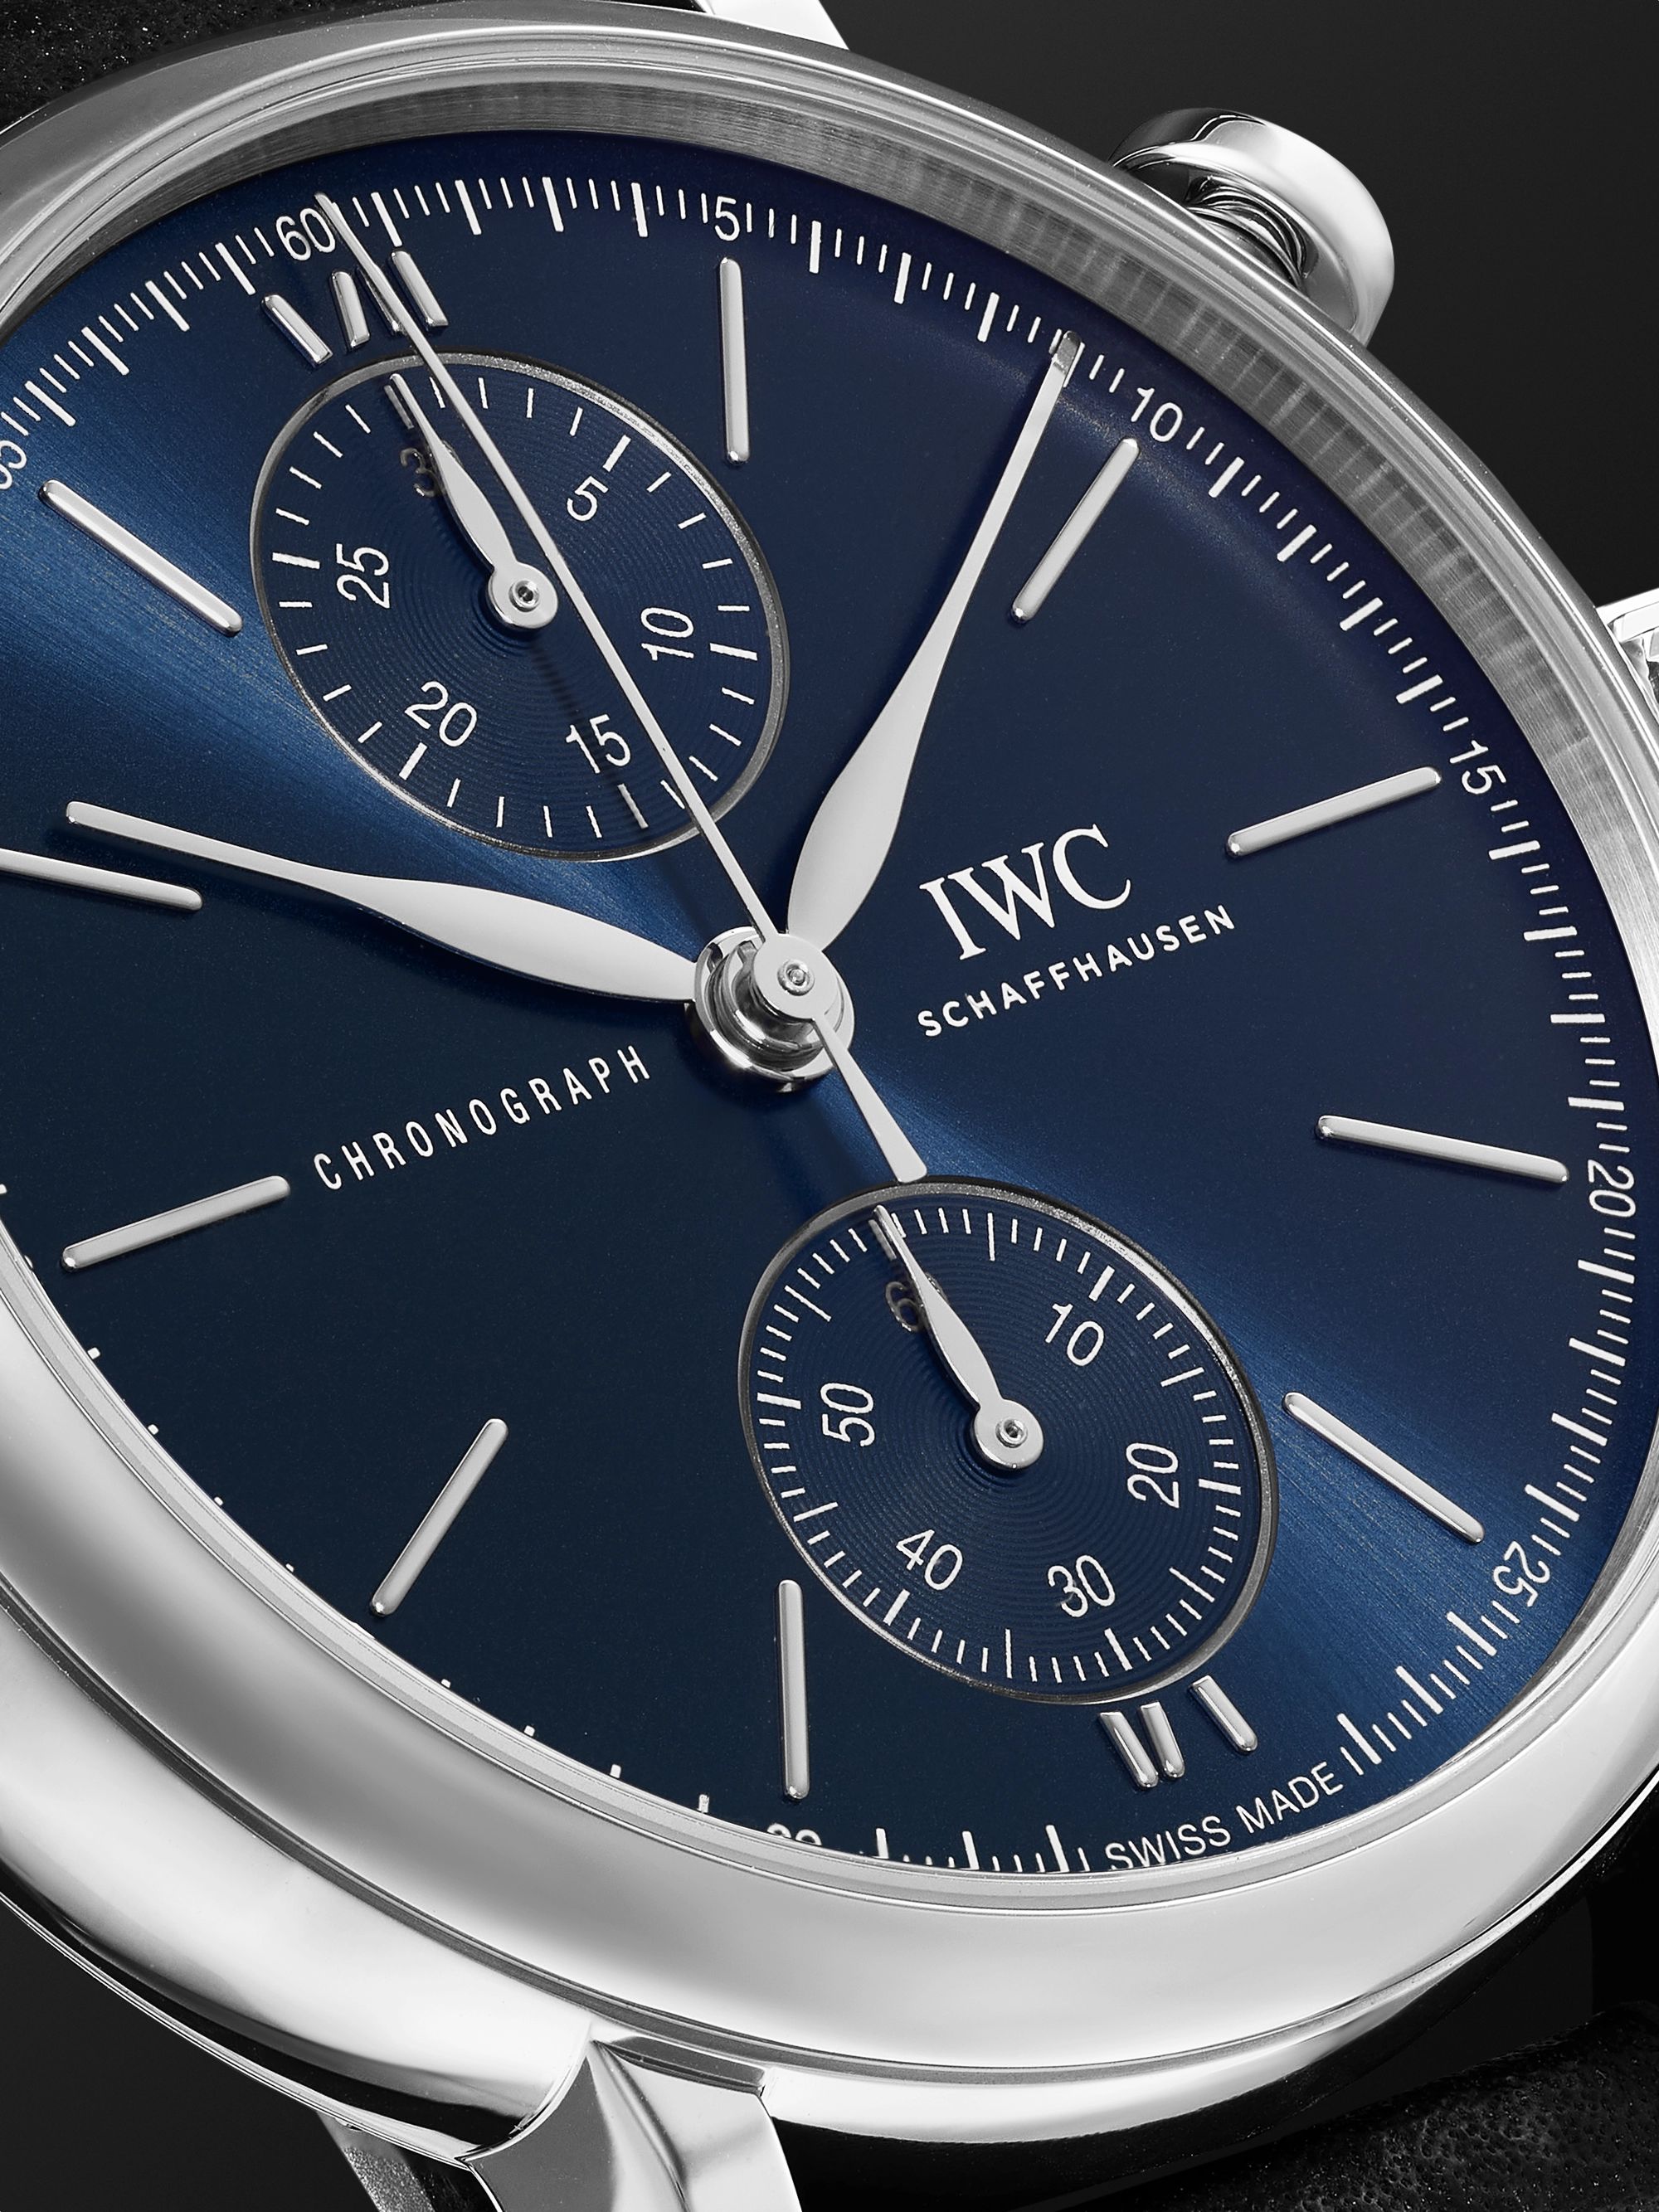 IWC SCHAFFHAUSEN + Laureus Sport for Good Portofino 39 Limited Edition Automatic Chronograph 39mm Stainless Steel and Leather Watch, Ref. No. IW391408